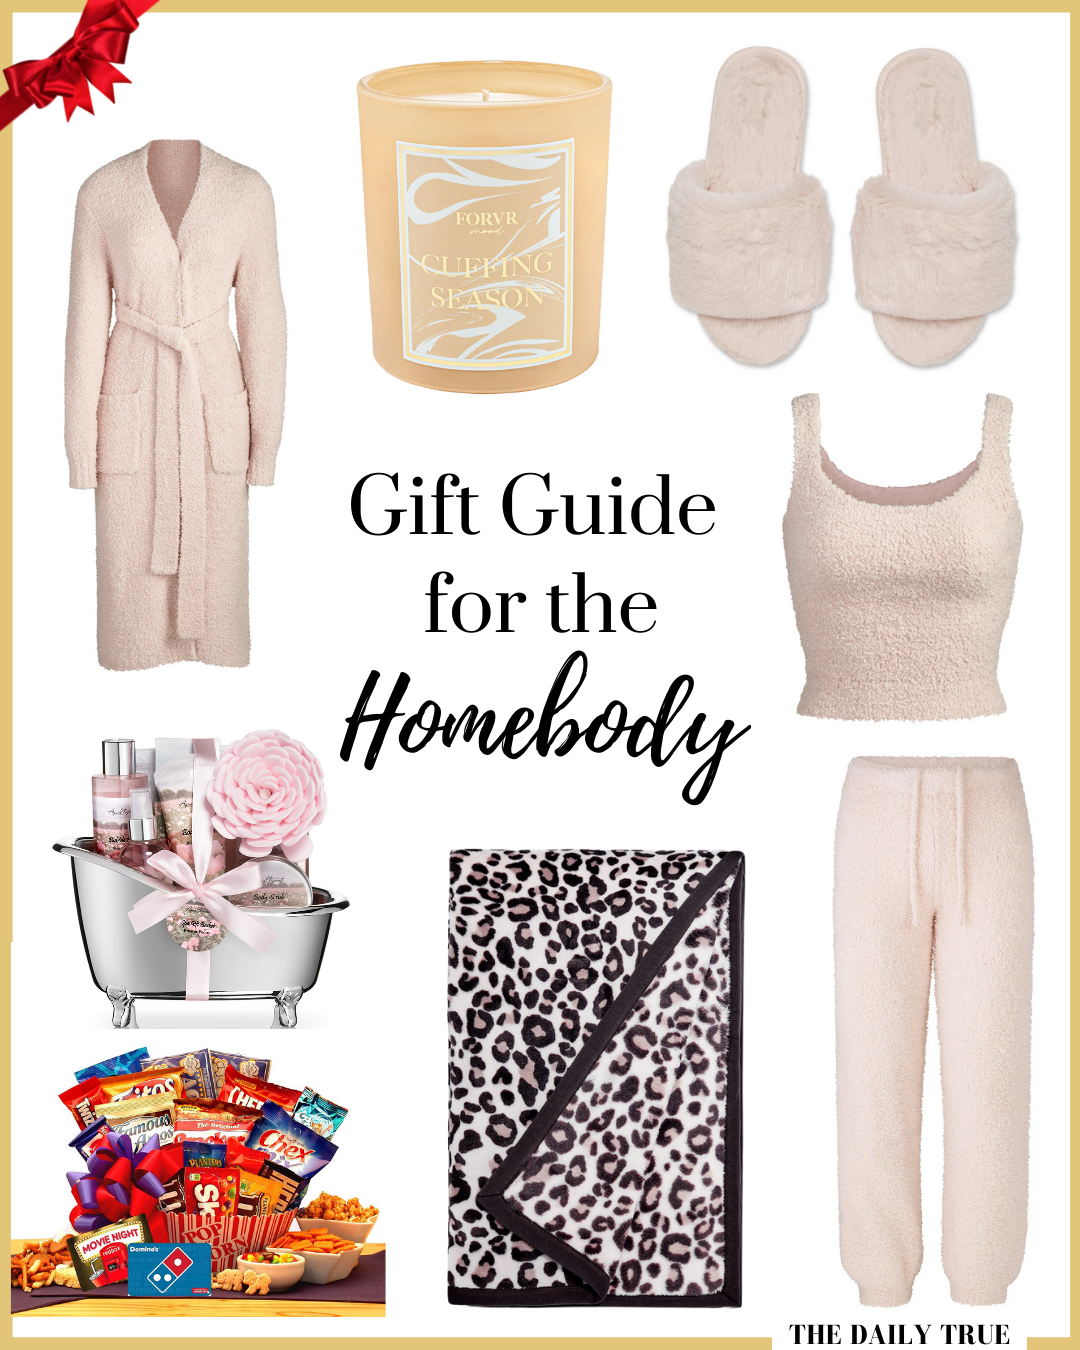 Gift Guide for the Homebody